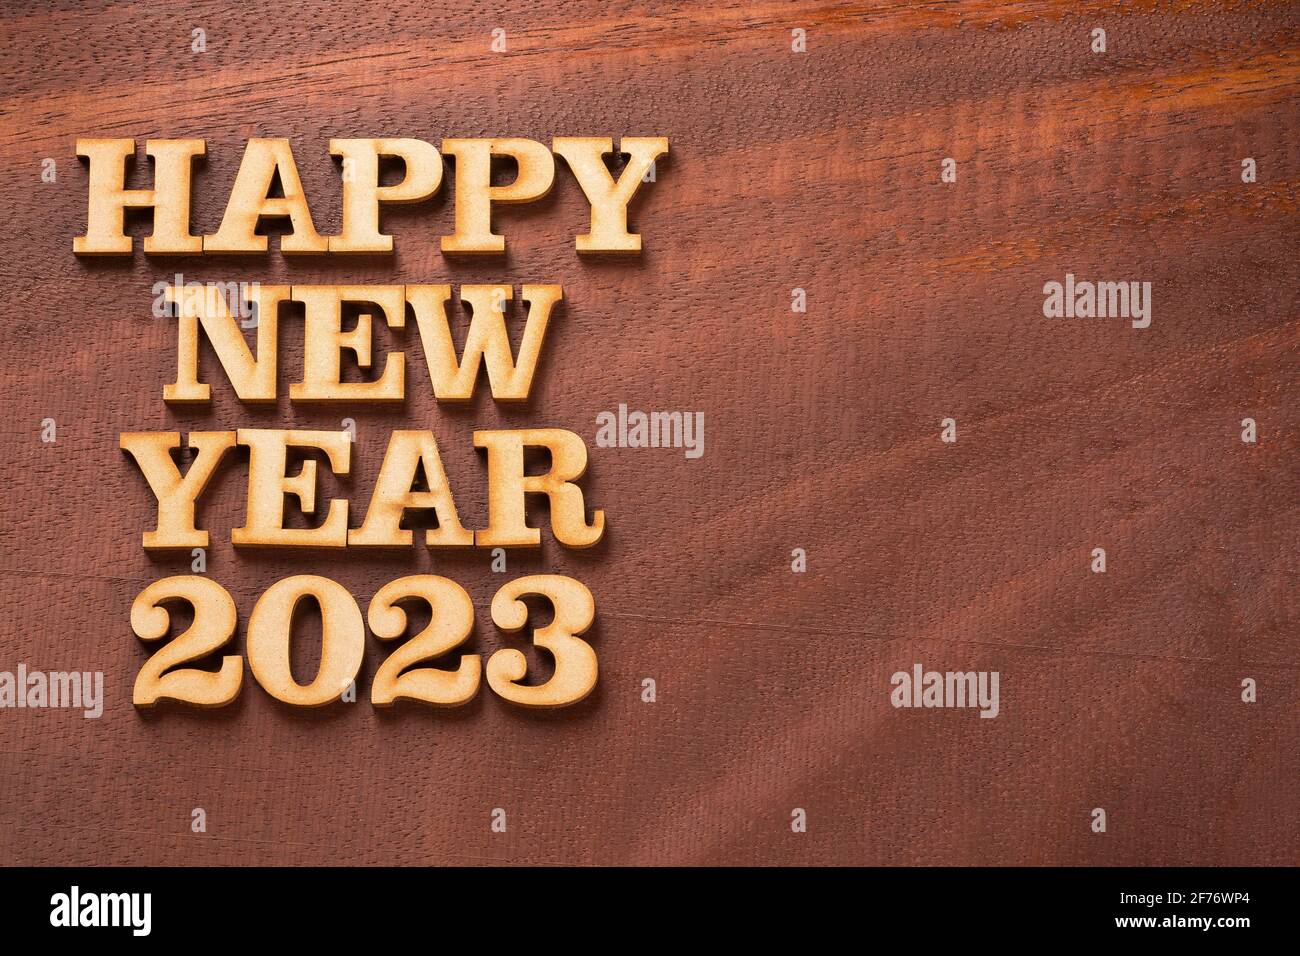 Happy New Year 2023 Hi Res Stock Photography And Images Alamy